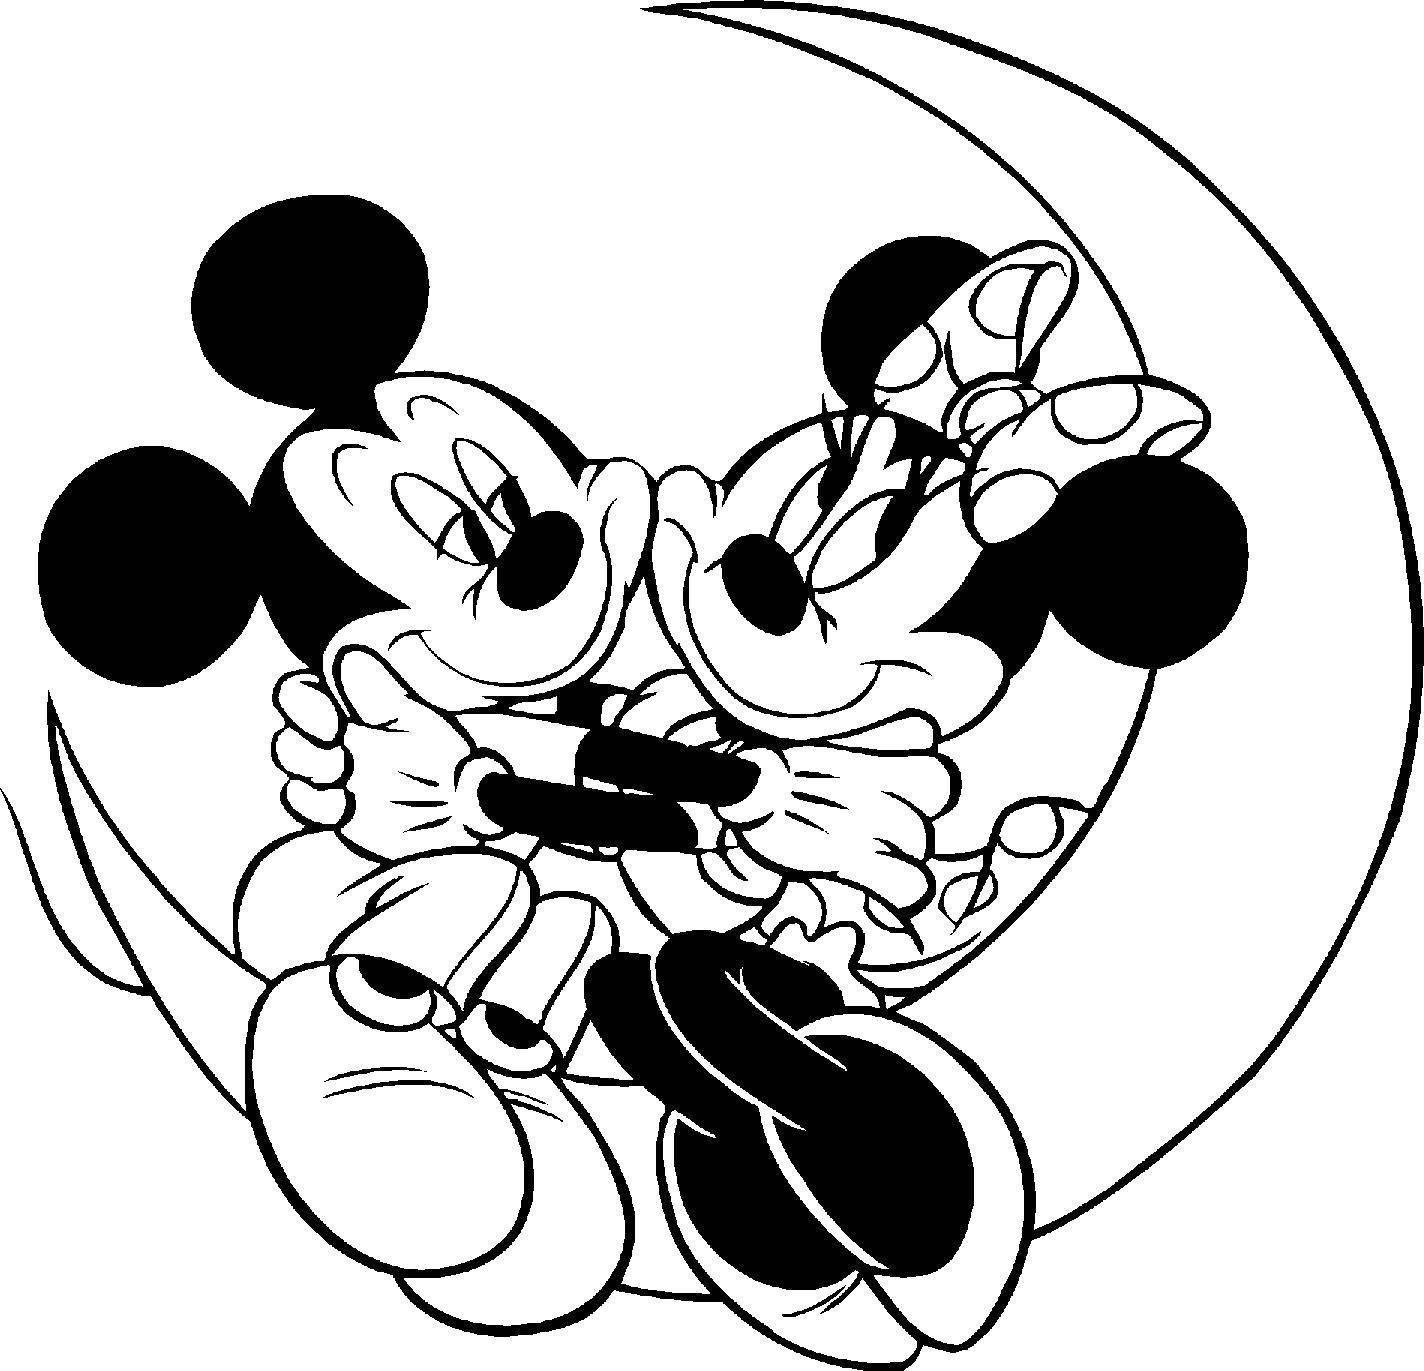 Coloring Mickey mouse and Minnie mouse hugging at the Crescent. Category Mickey mouse. Tags:  Disney, Mickey Mouse, Minnie Mouse.